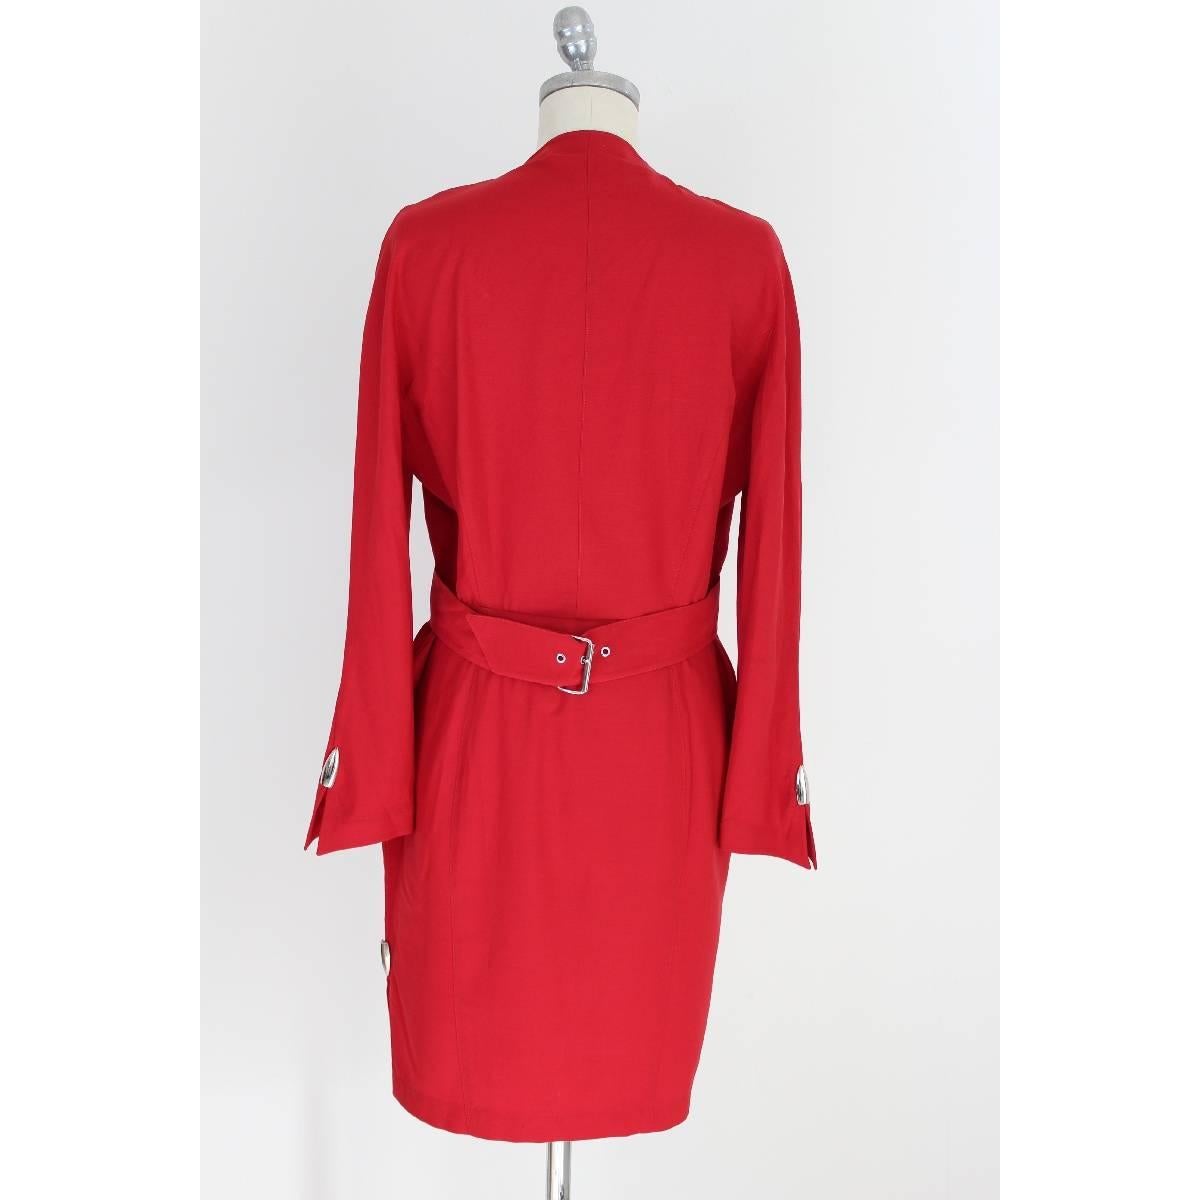 Red Thierry Mugler Paris 100% worsted wool red dress size 44 it vintage 1980s 